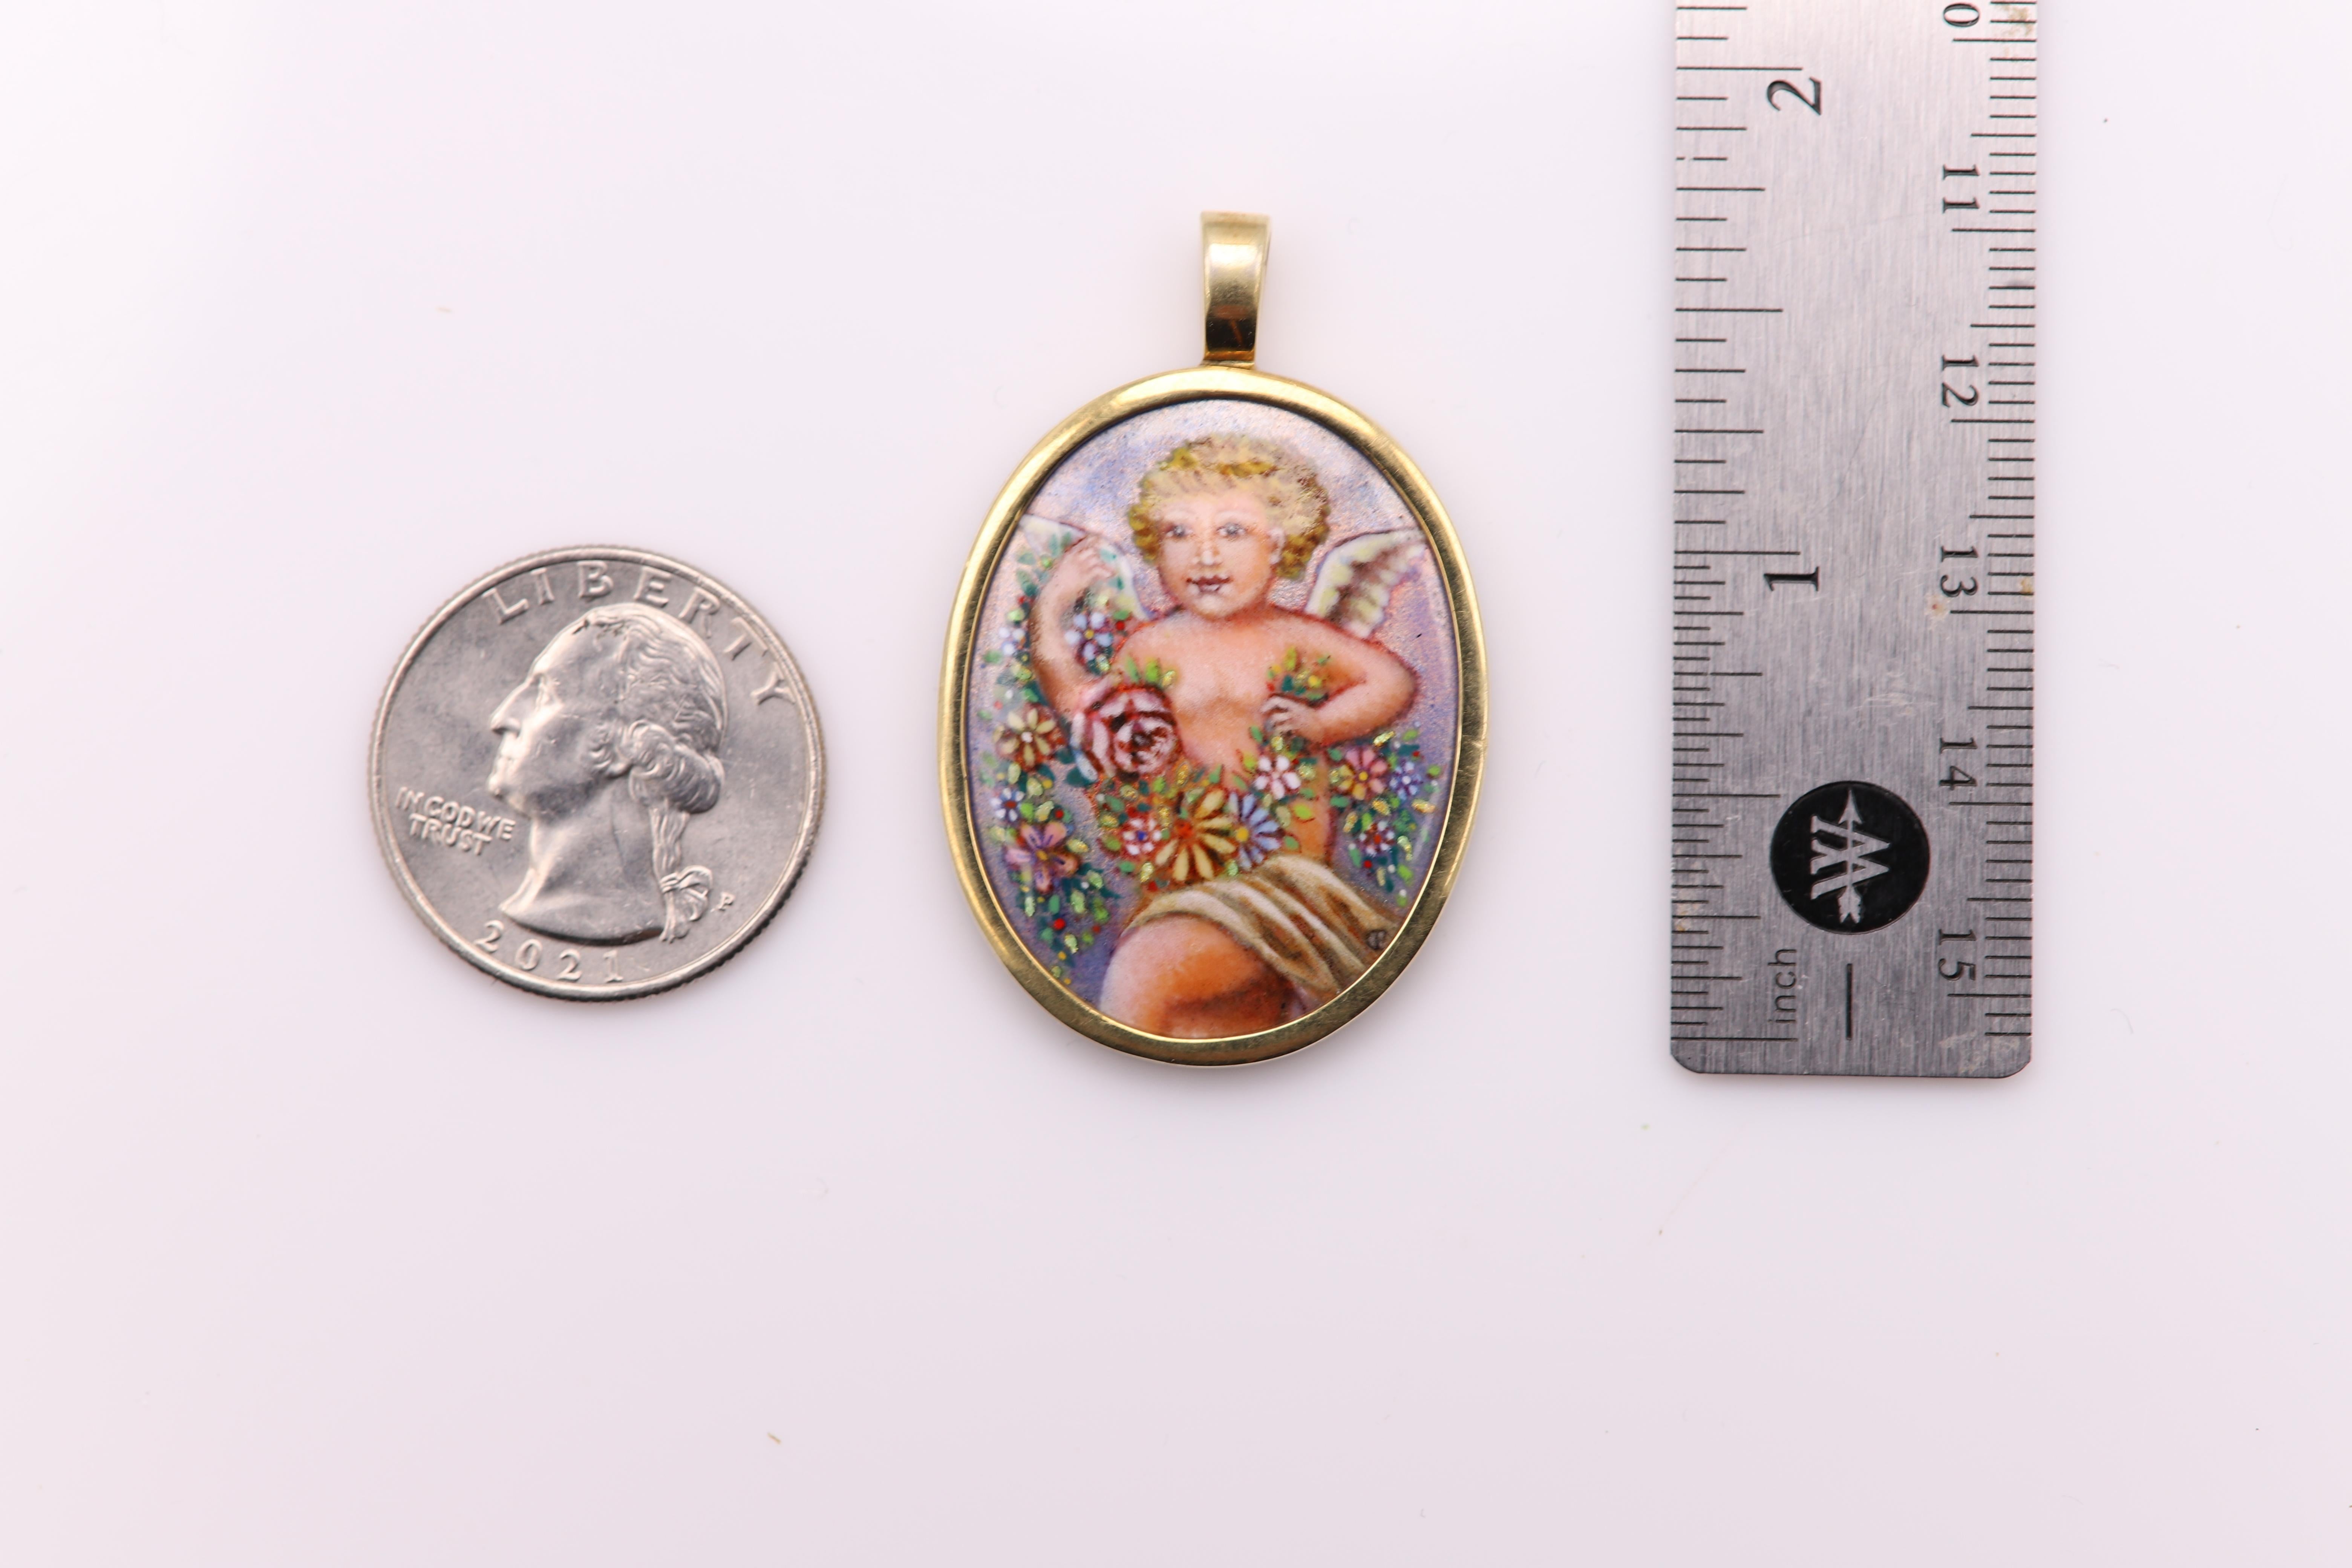 Unique Vintage baby Angel Enamel Art Hand Made in Spain
18k Solid Yellow Gold (& Sterling Silver 925 back part)
approx. weight 11.0 grams
Size: 35 x 28 mm ( 1.5' inch)
Chain not included
Gift Box Included
(rollmelt#2)